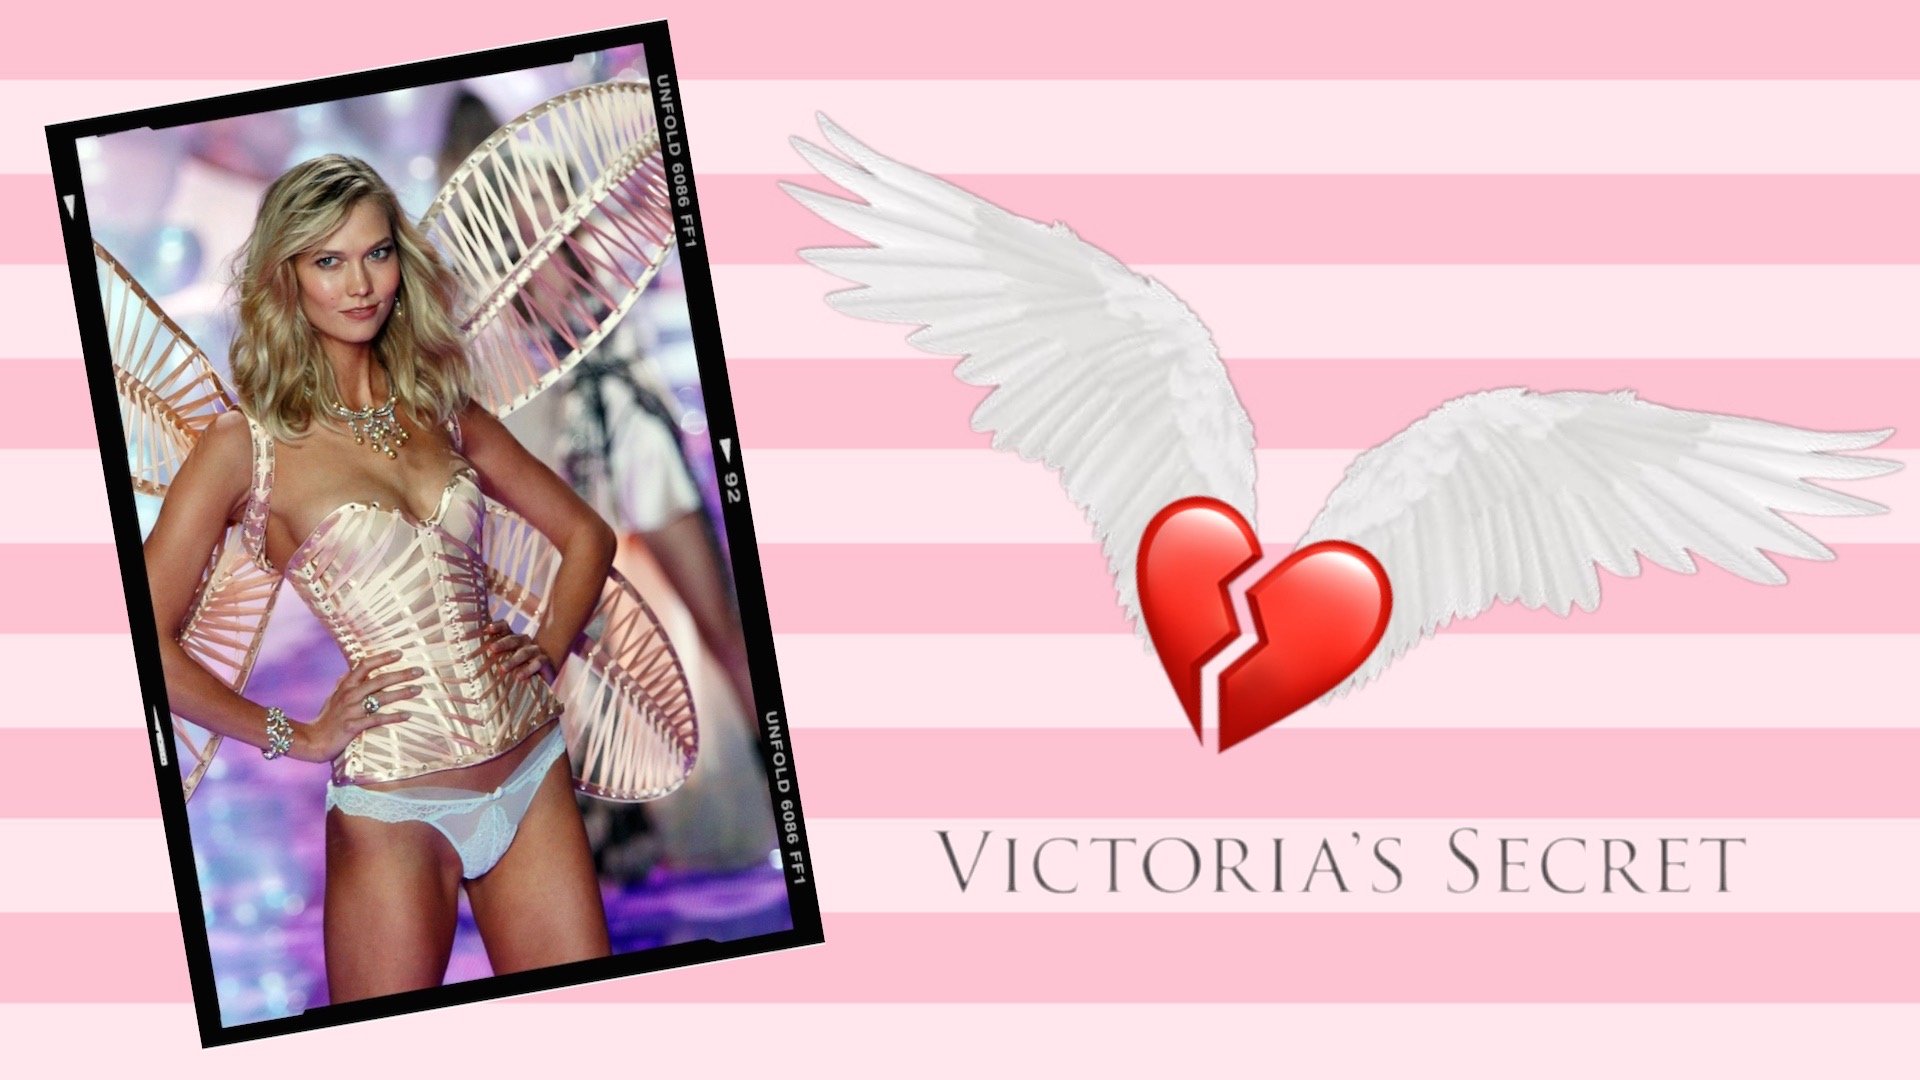 Fantasy Victoria's Secret Lingerie: Which Would You Wear